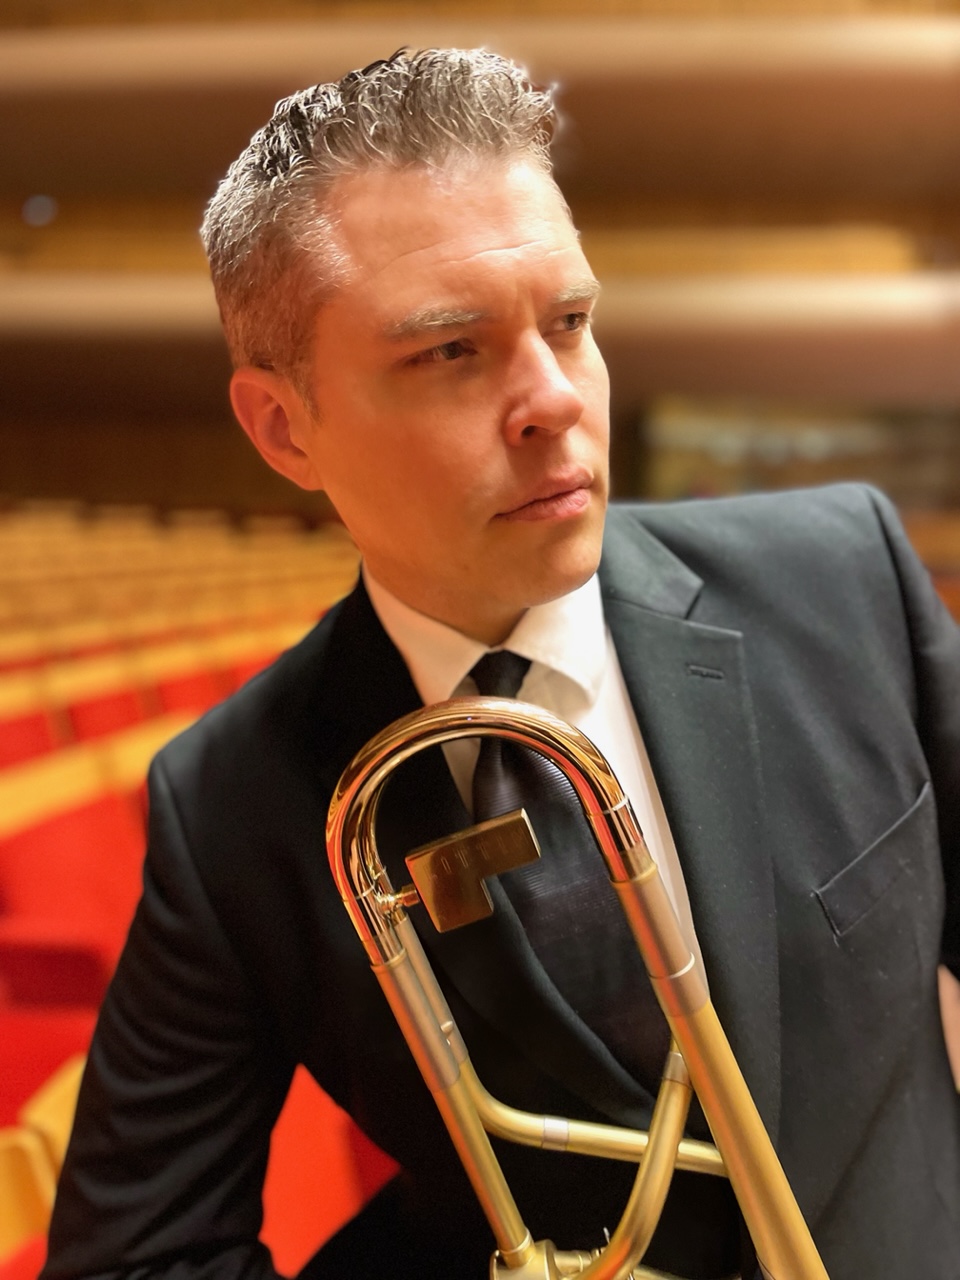 A man in a suit poses with a trombone